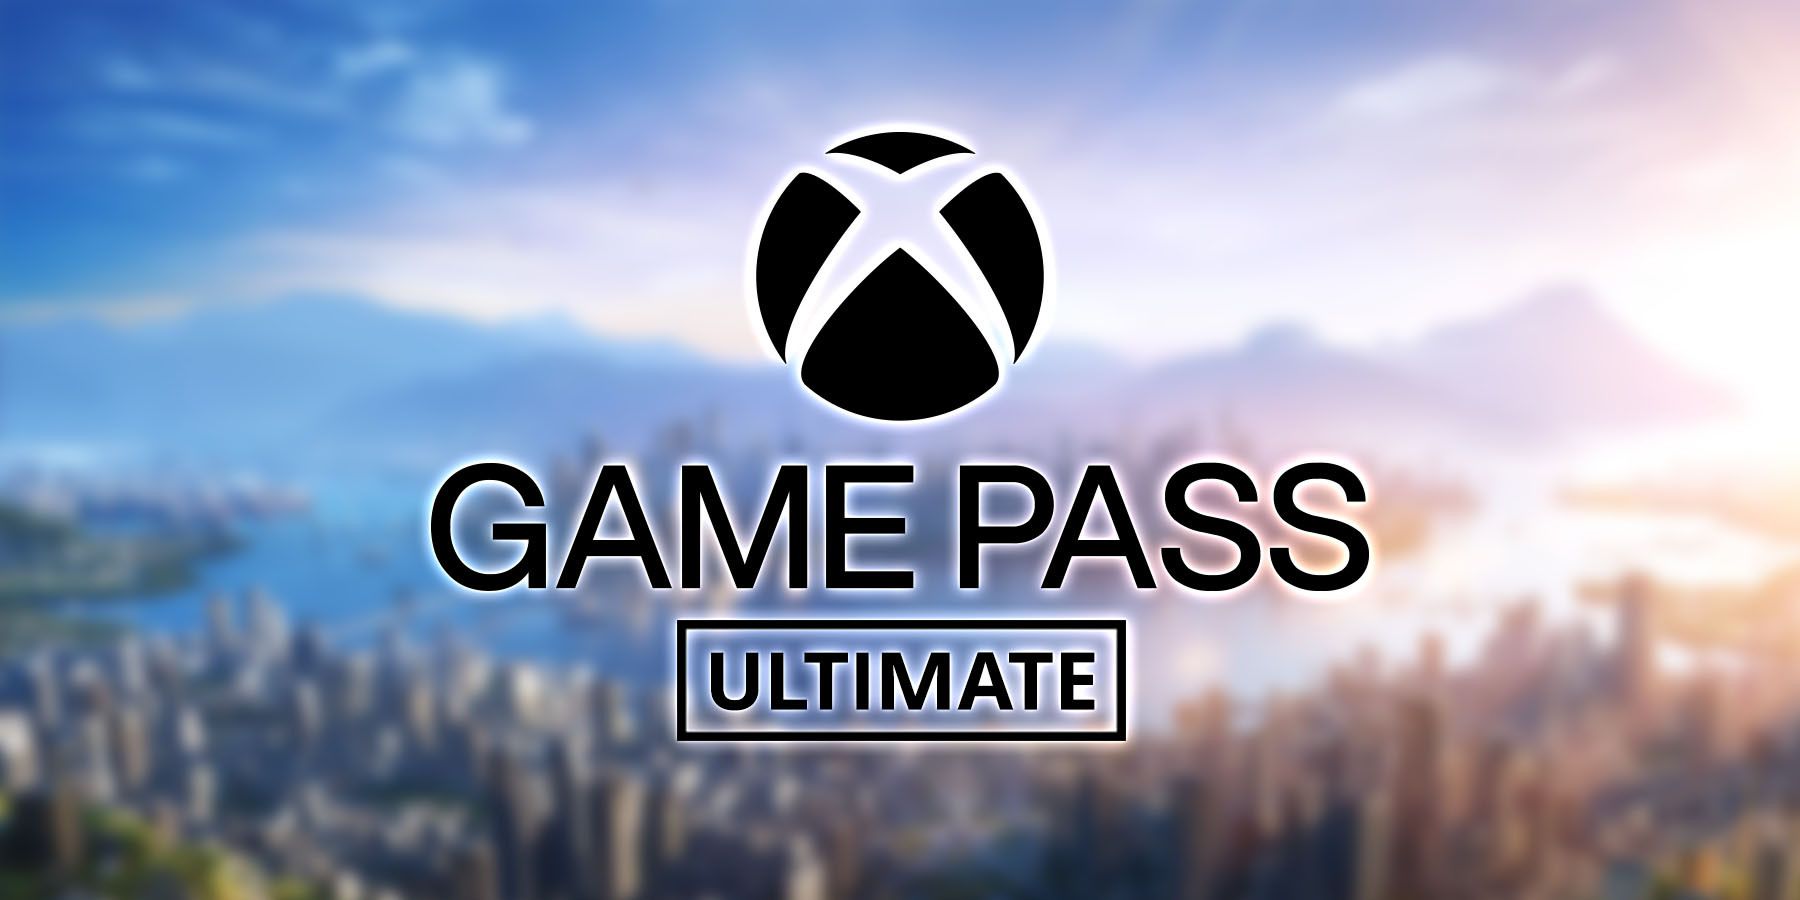 Cities: Skylines 2 joins Xbox Game Pass in October